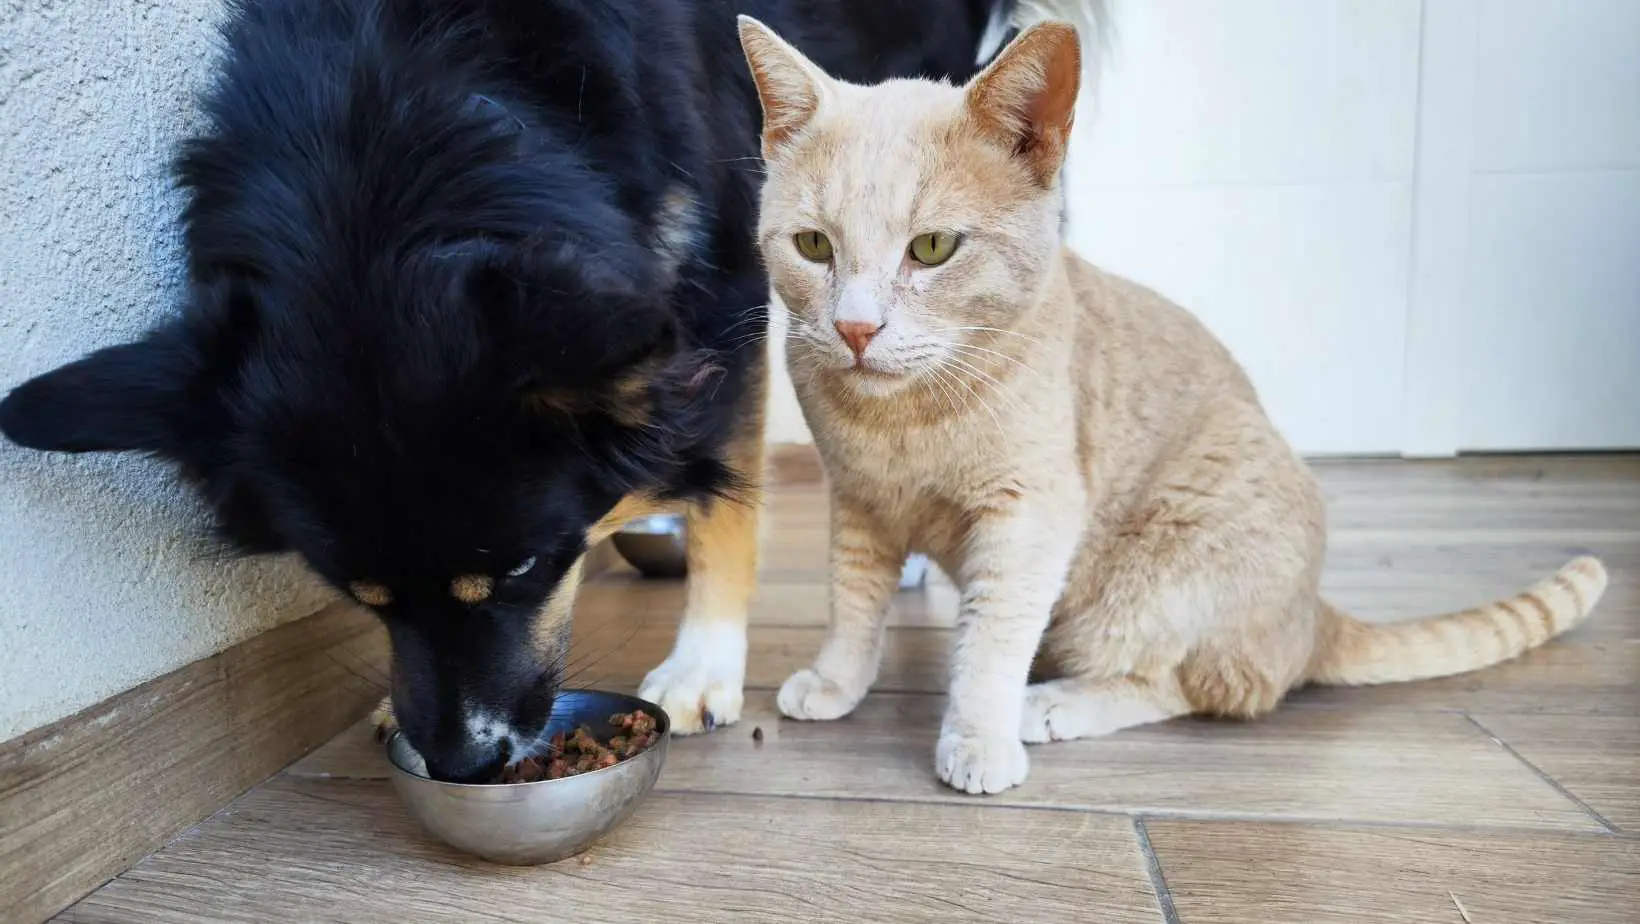 What happens if a dog eats cat food? What to do and what not to do